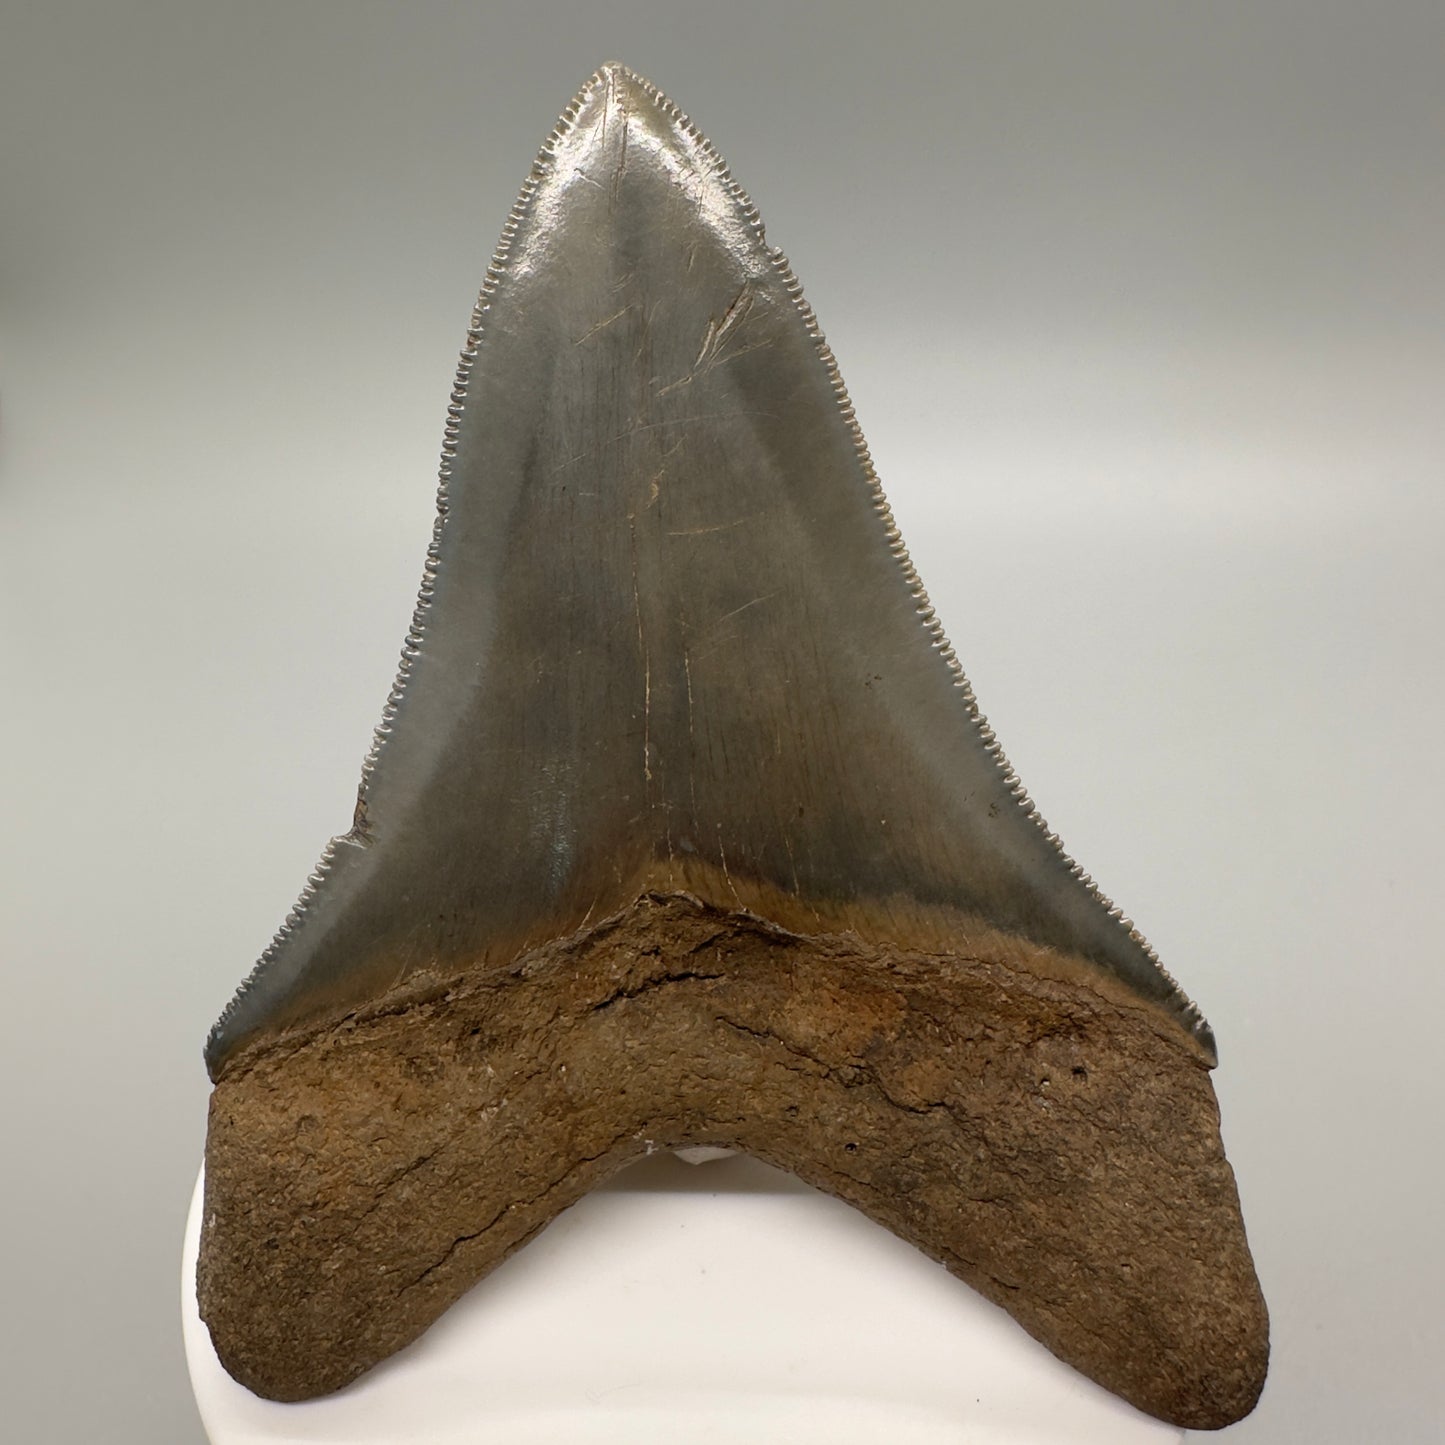 Sharply serrated 3.47" Fossil Megalodon Tooth: Scuba Diving Discovery from Georgia CM4610 - Back